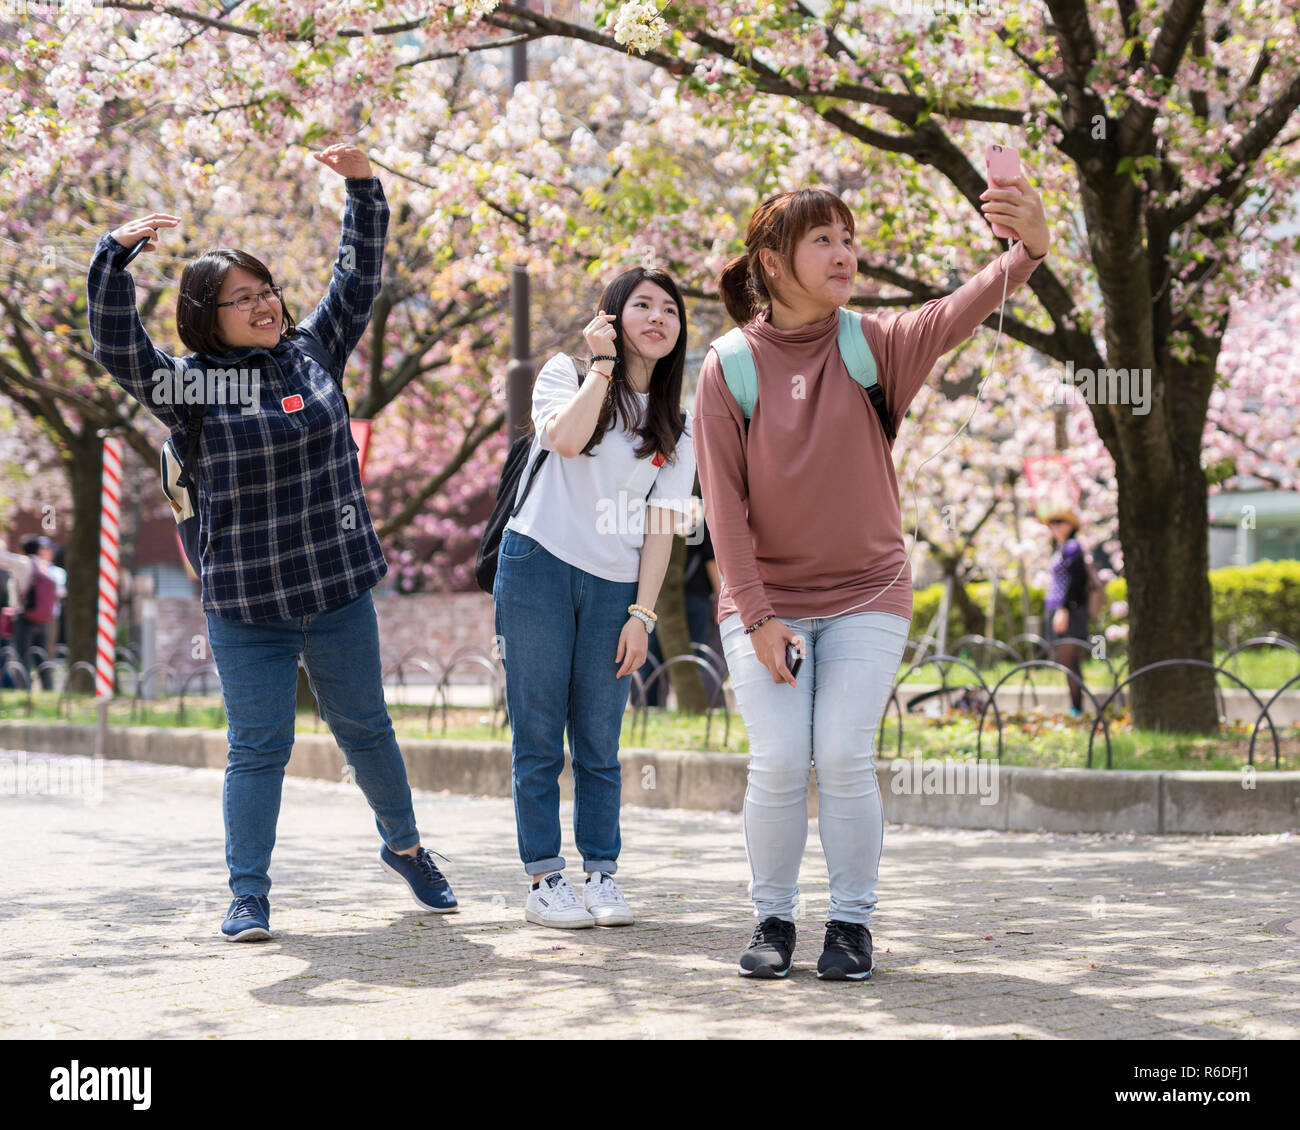 Girls pose for selfie in front of cherry blossom trees at Osaka Mint Bureau, Japan Stock Photo